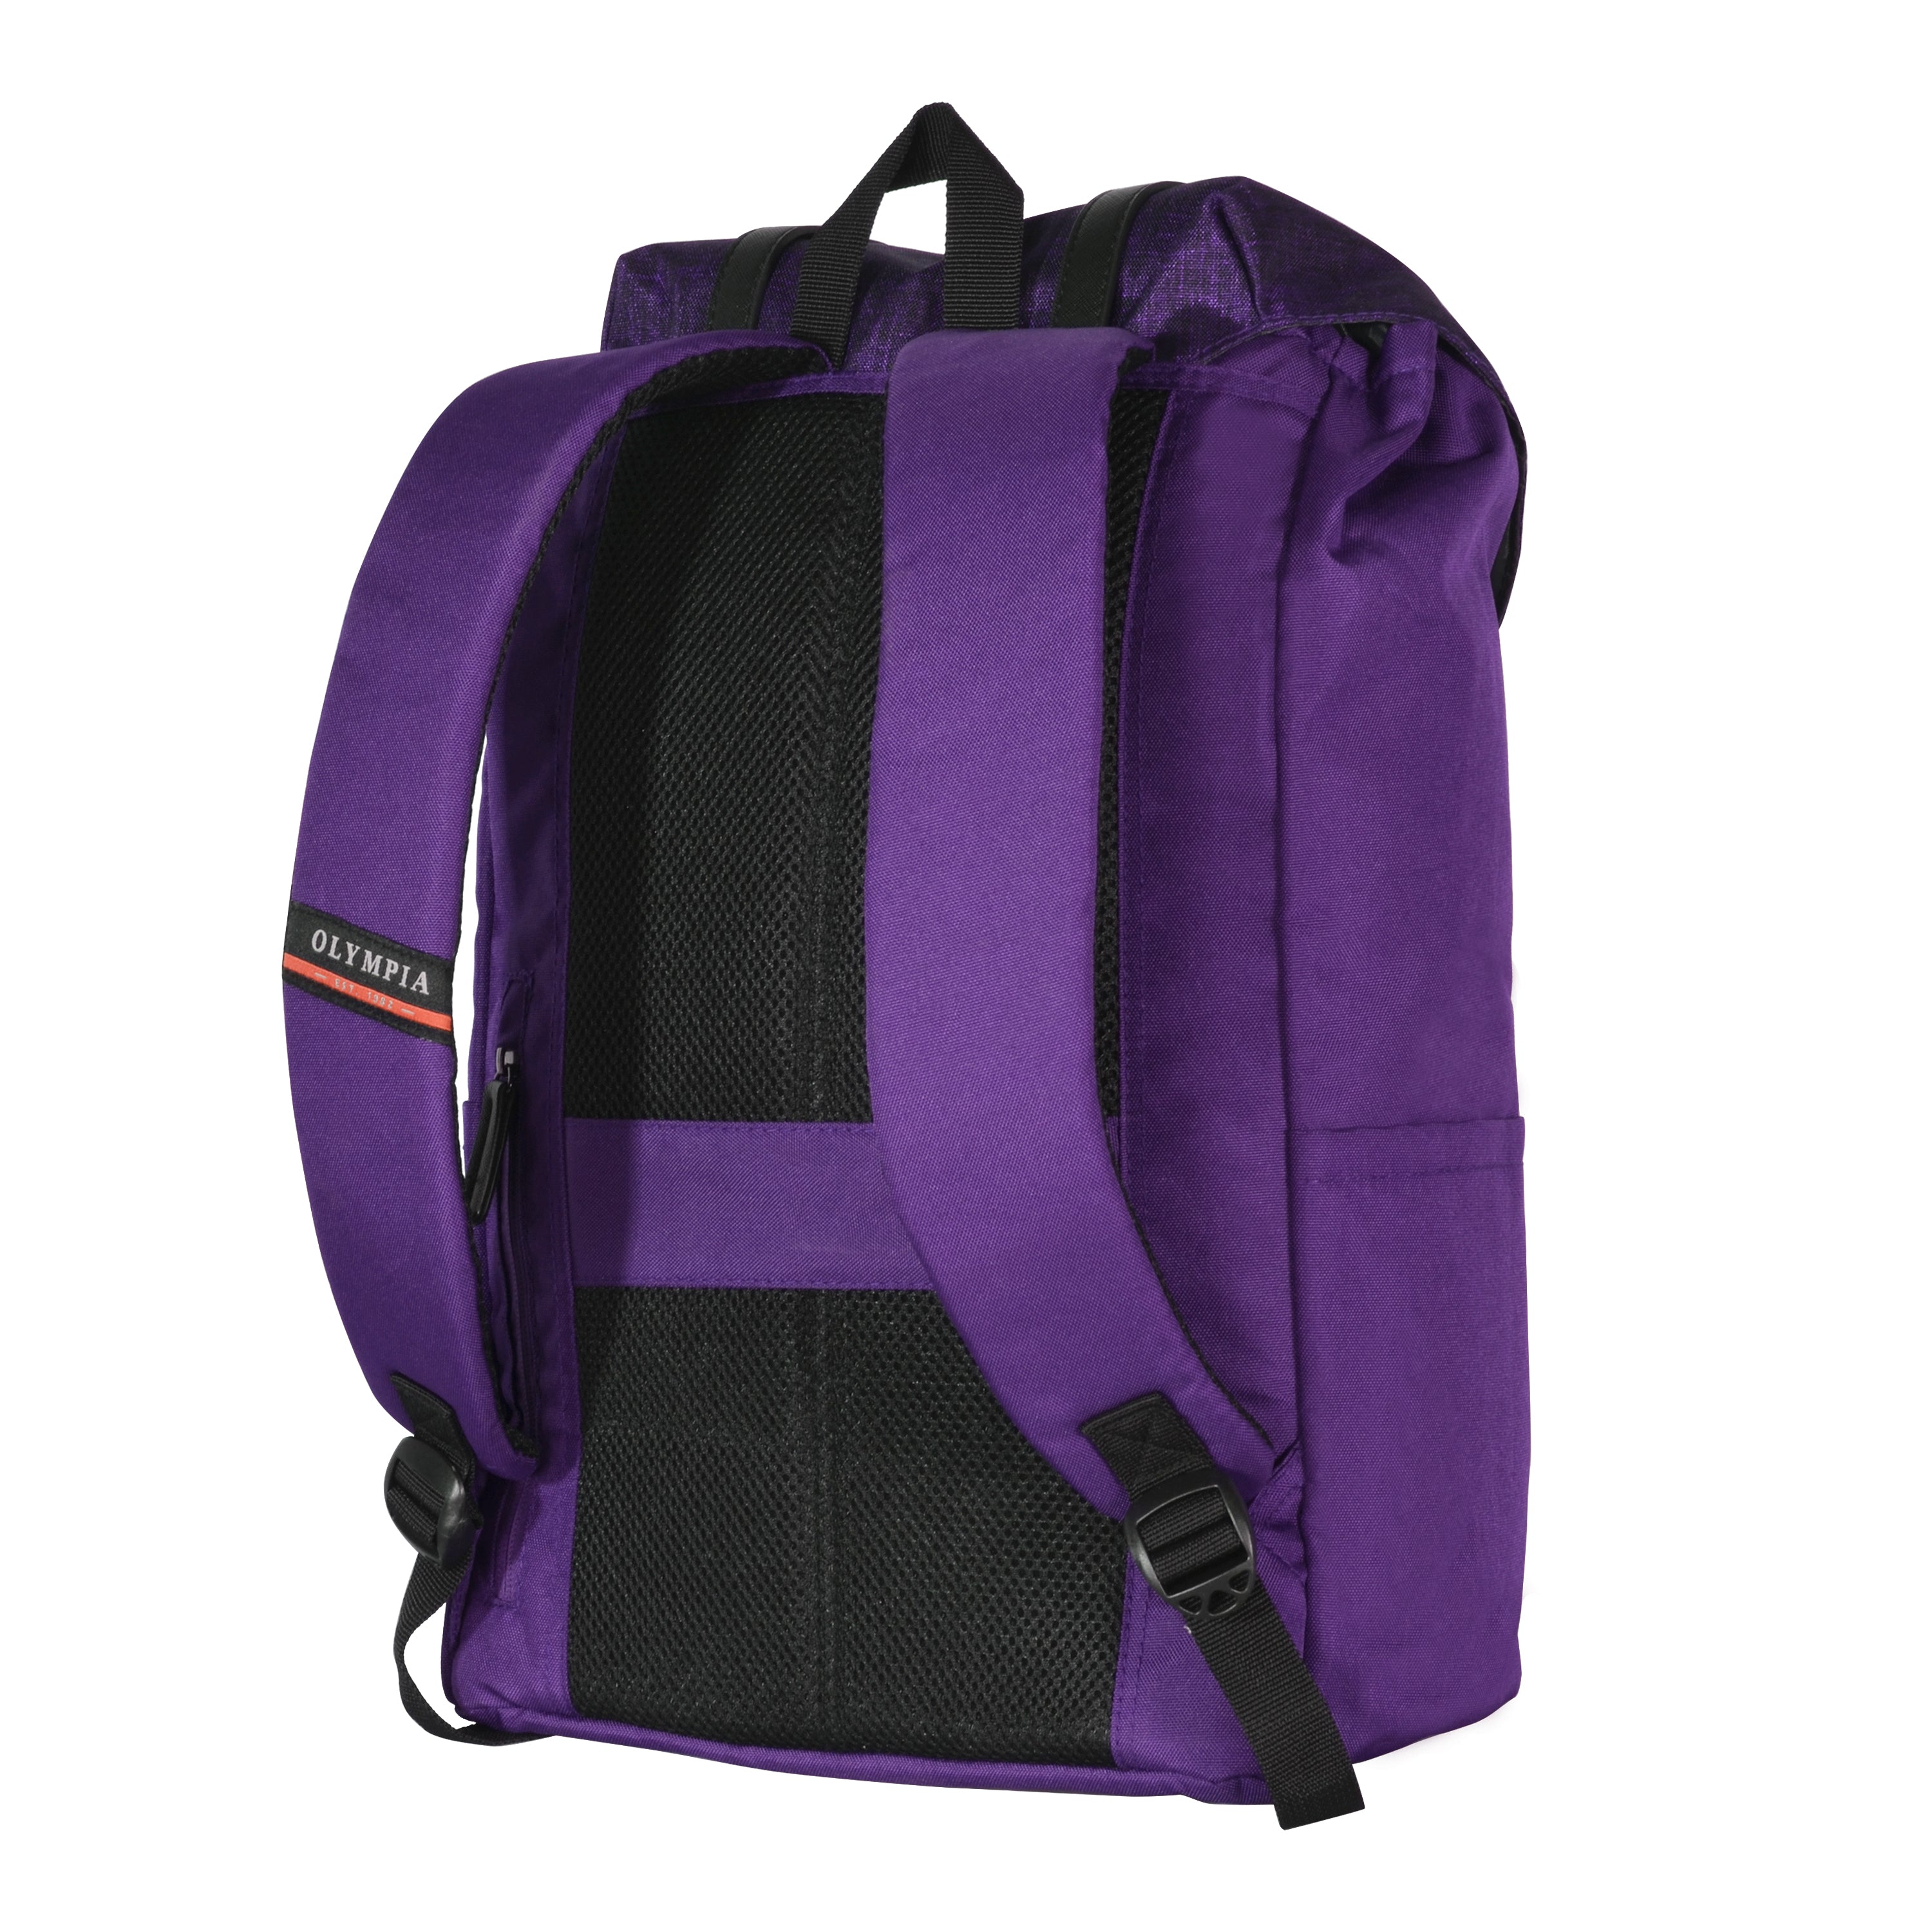 Cambridge Lightweight Backpack with Laptop Compartment